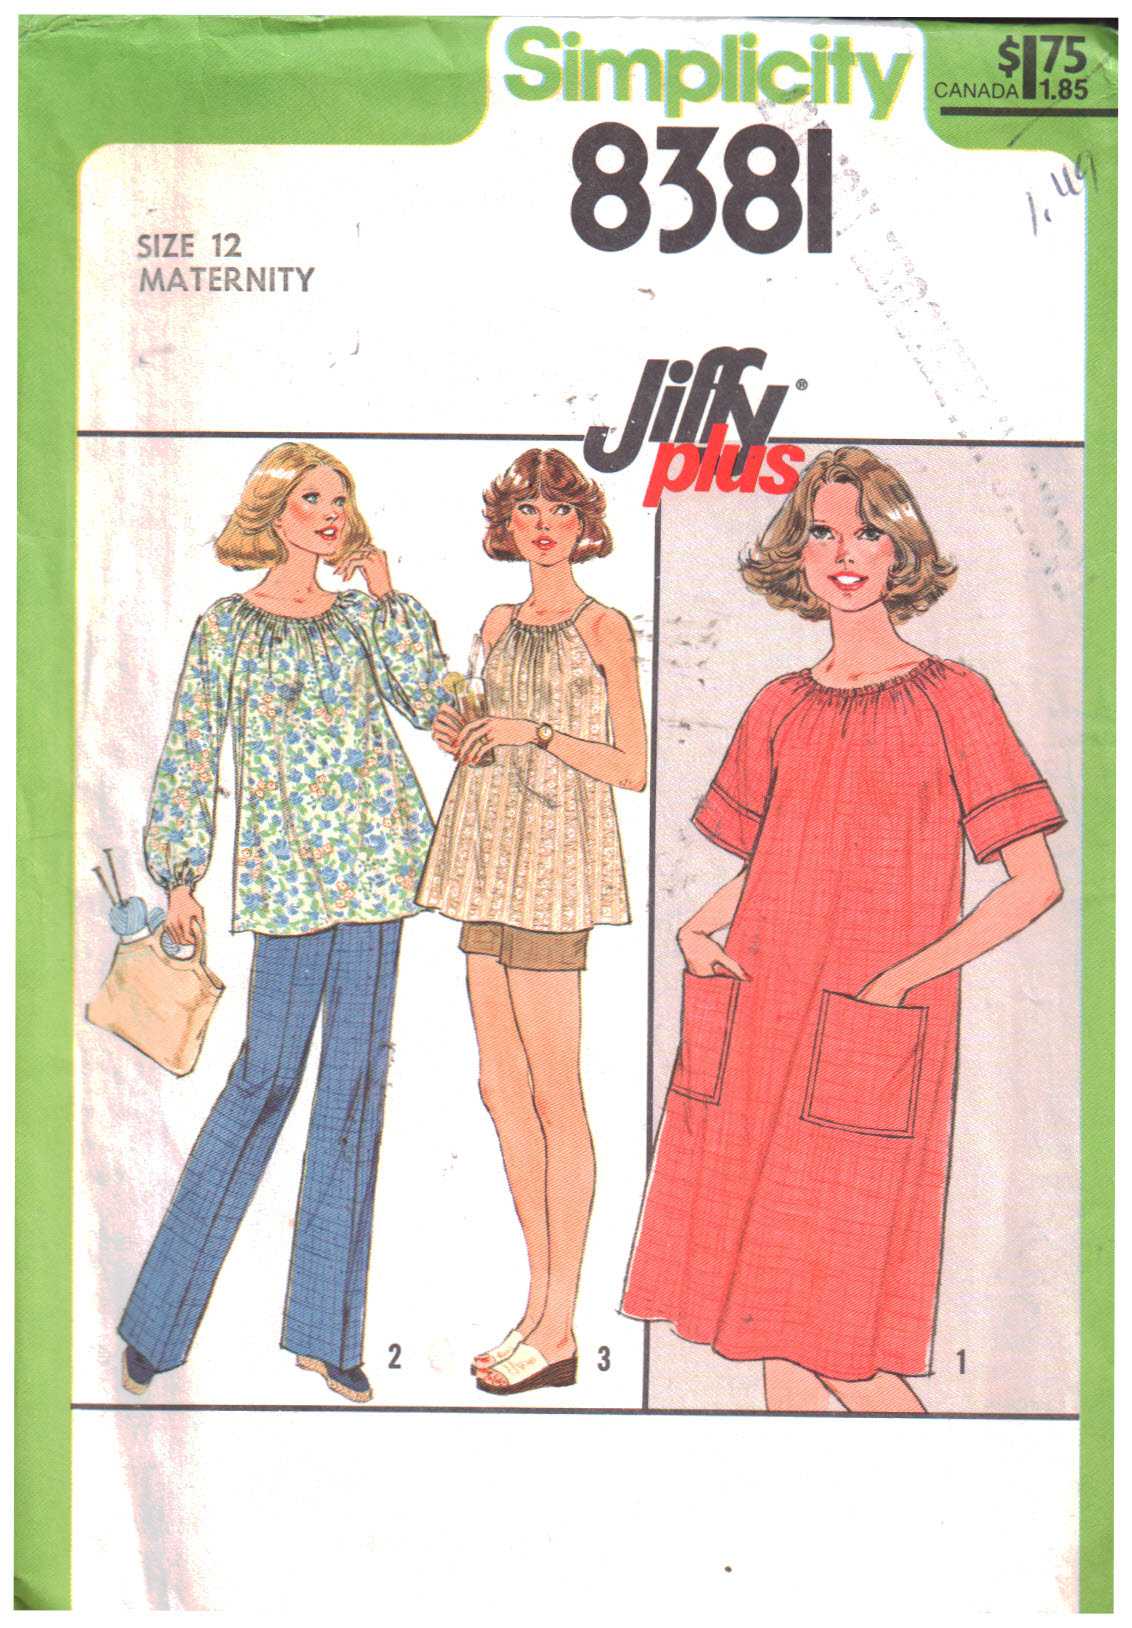 Simplicity 7773 misses maternity long dress or top and pants and babies T-shirt size 16 bust 38 vintage 1970's sewing pattern